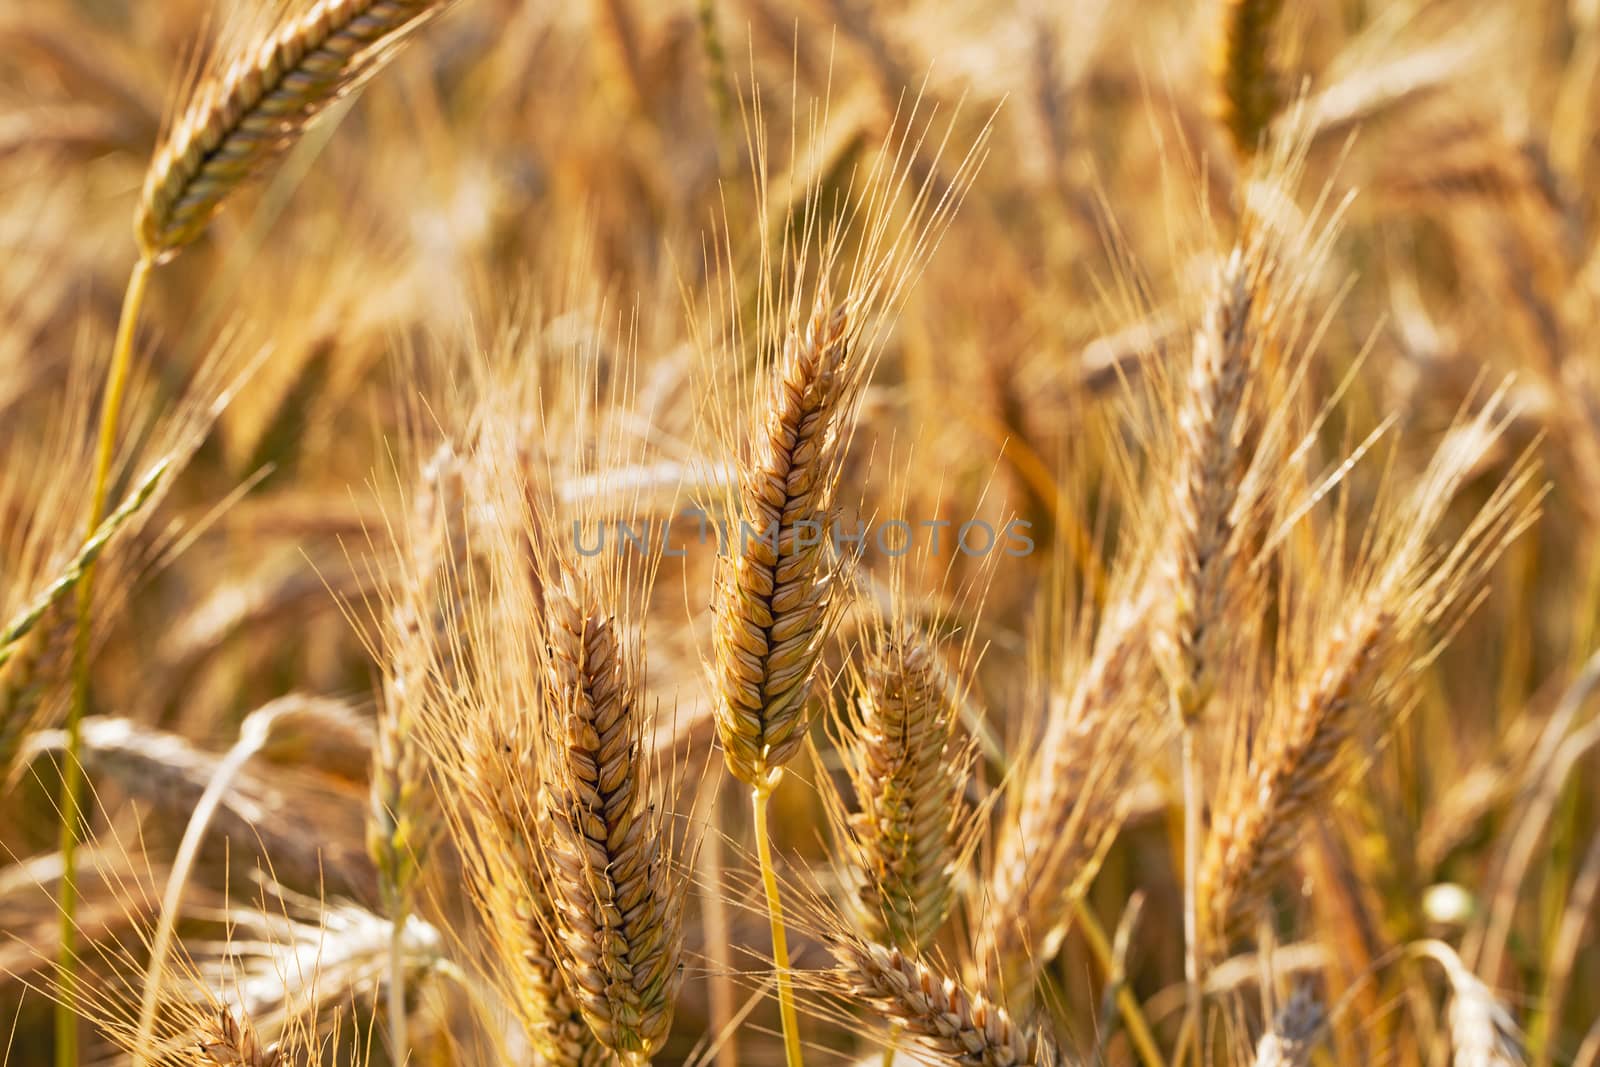  the ears of the ripened cereals photographed by a close up